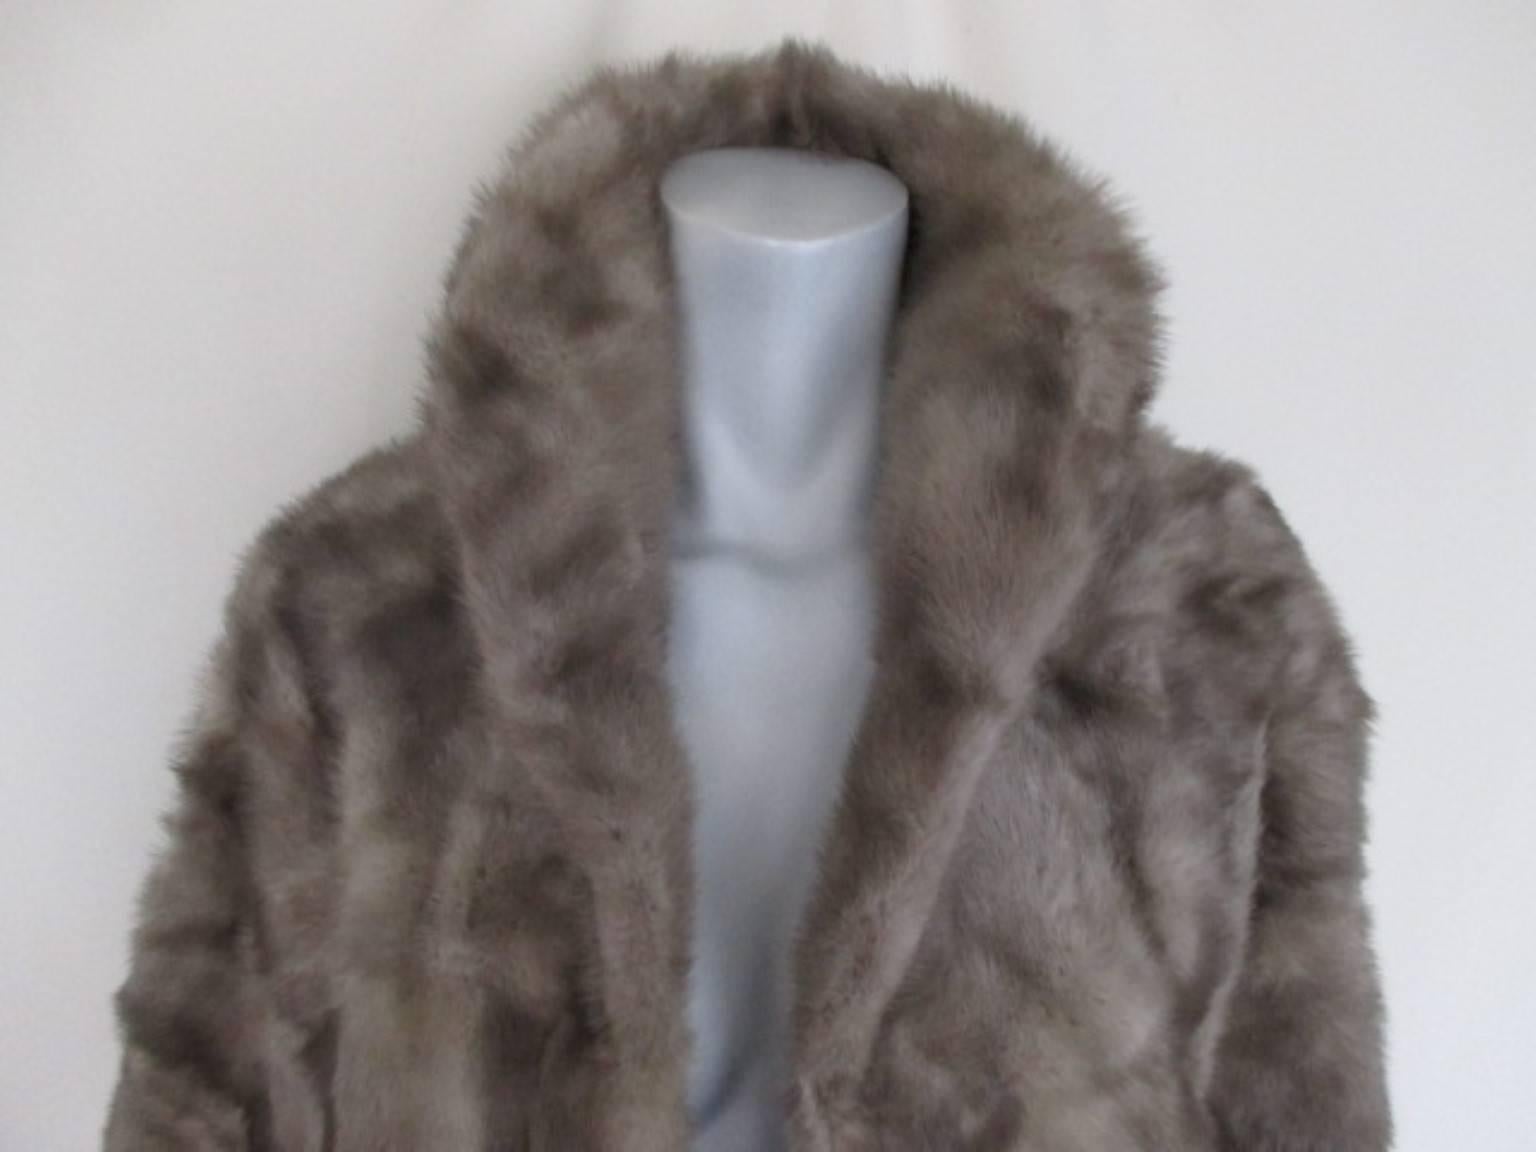 This beautiful vintage stole is made of grey color mink.
With 2 pockets and silk lining.
The condition is good, it has wear at the lining.
Measurement;
about 160 cm/ 62.99 inch.

Please note that vintage items are not new and therefore might have